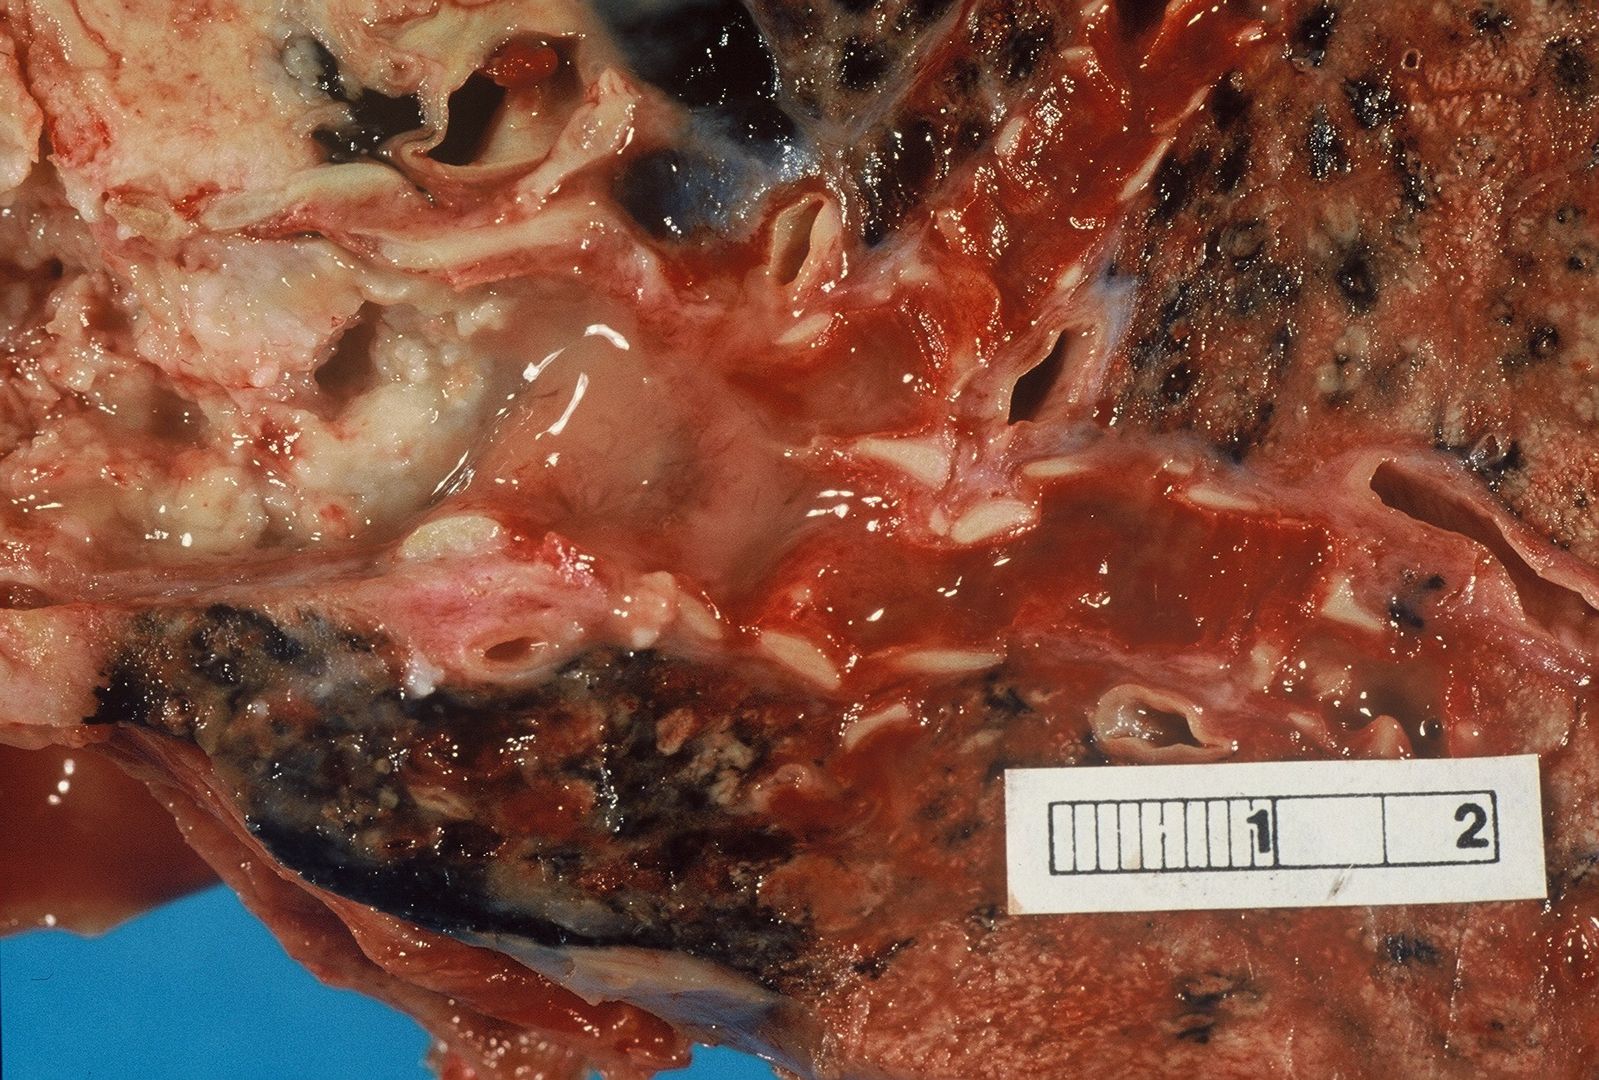 Gross pathology: bronchial squamous lung cell cancer By John Hayman (Own work) [Public domain], via Wikimedia Commons[5]